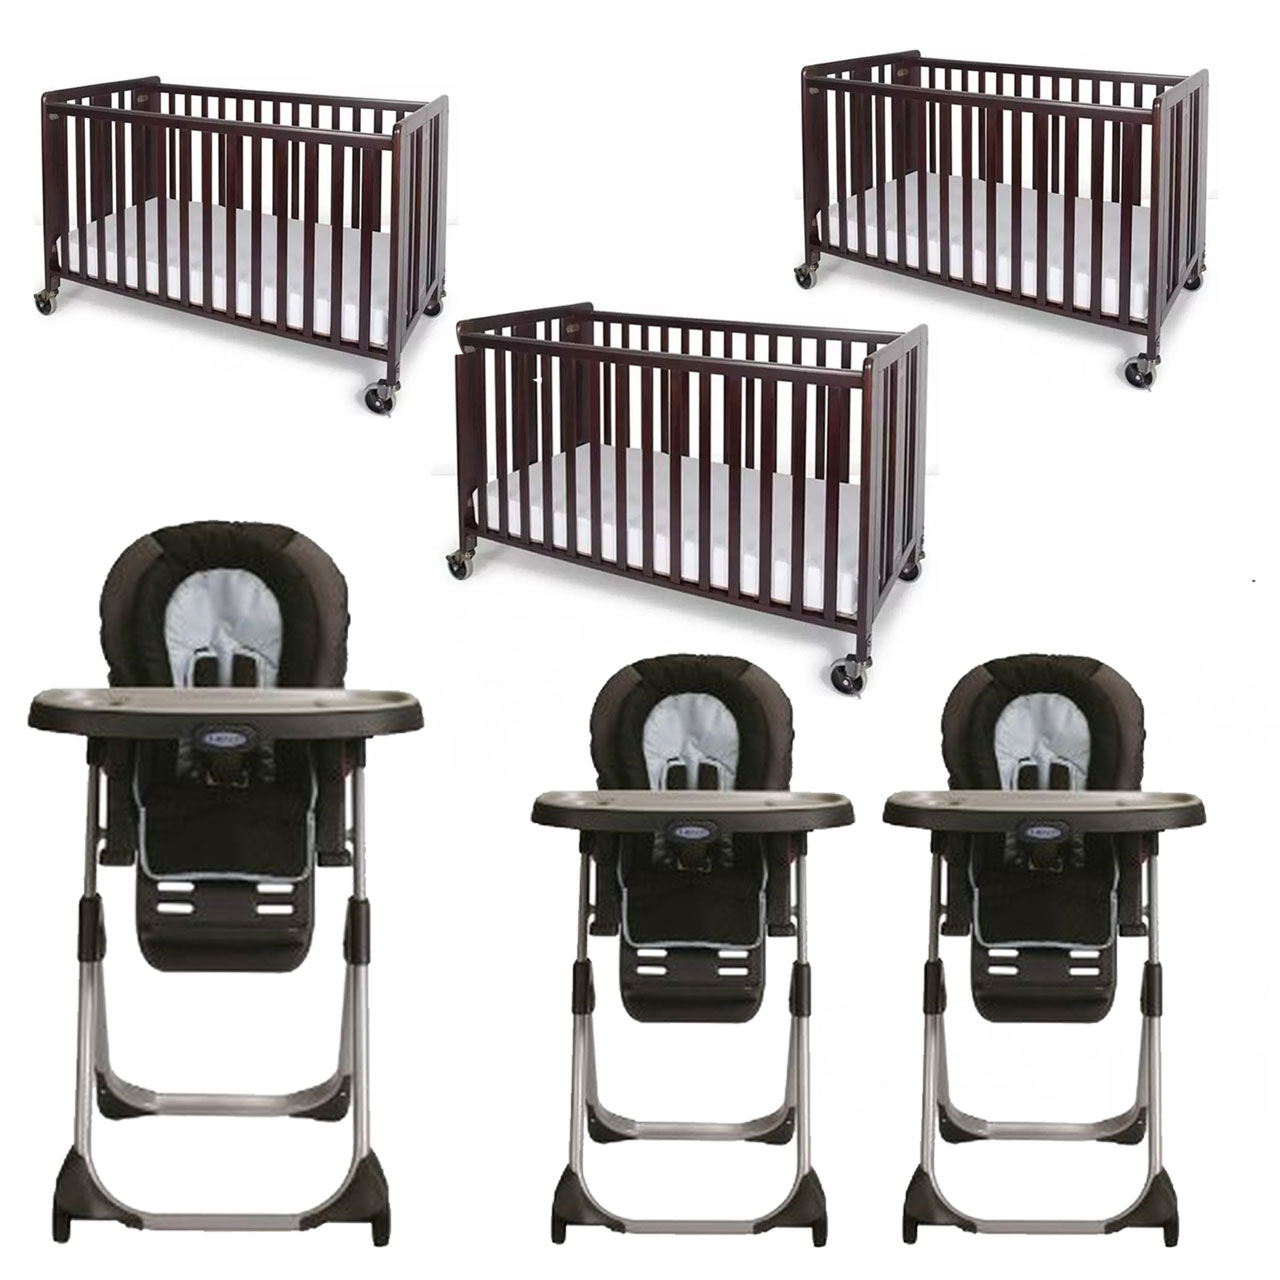 PACKAGE 29 (3 HIGH CHAIRS, 3 FULL SIZE CRIBS WITH MATTRESS AND SHEETS)